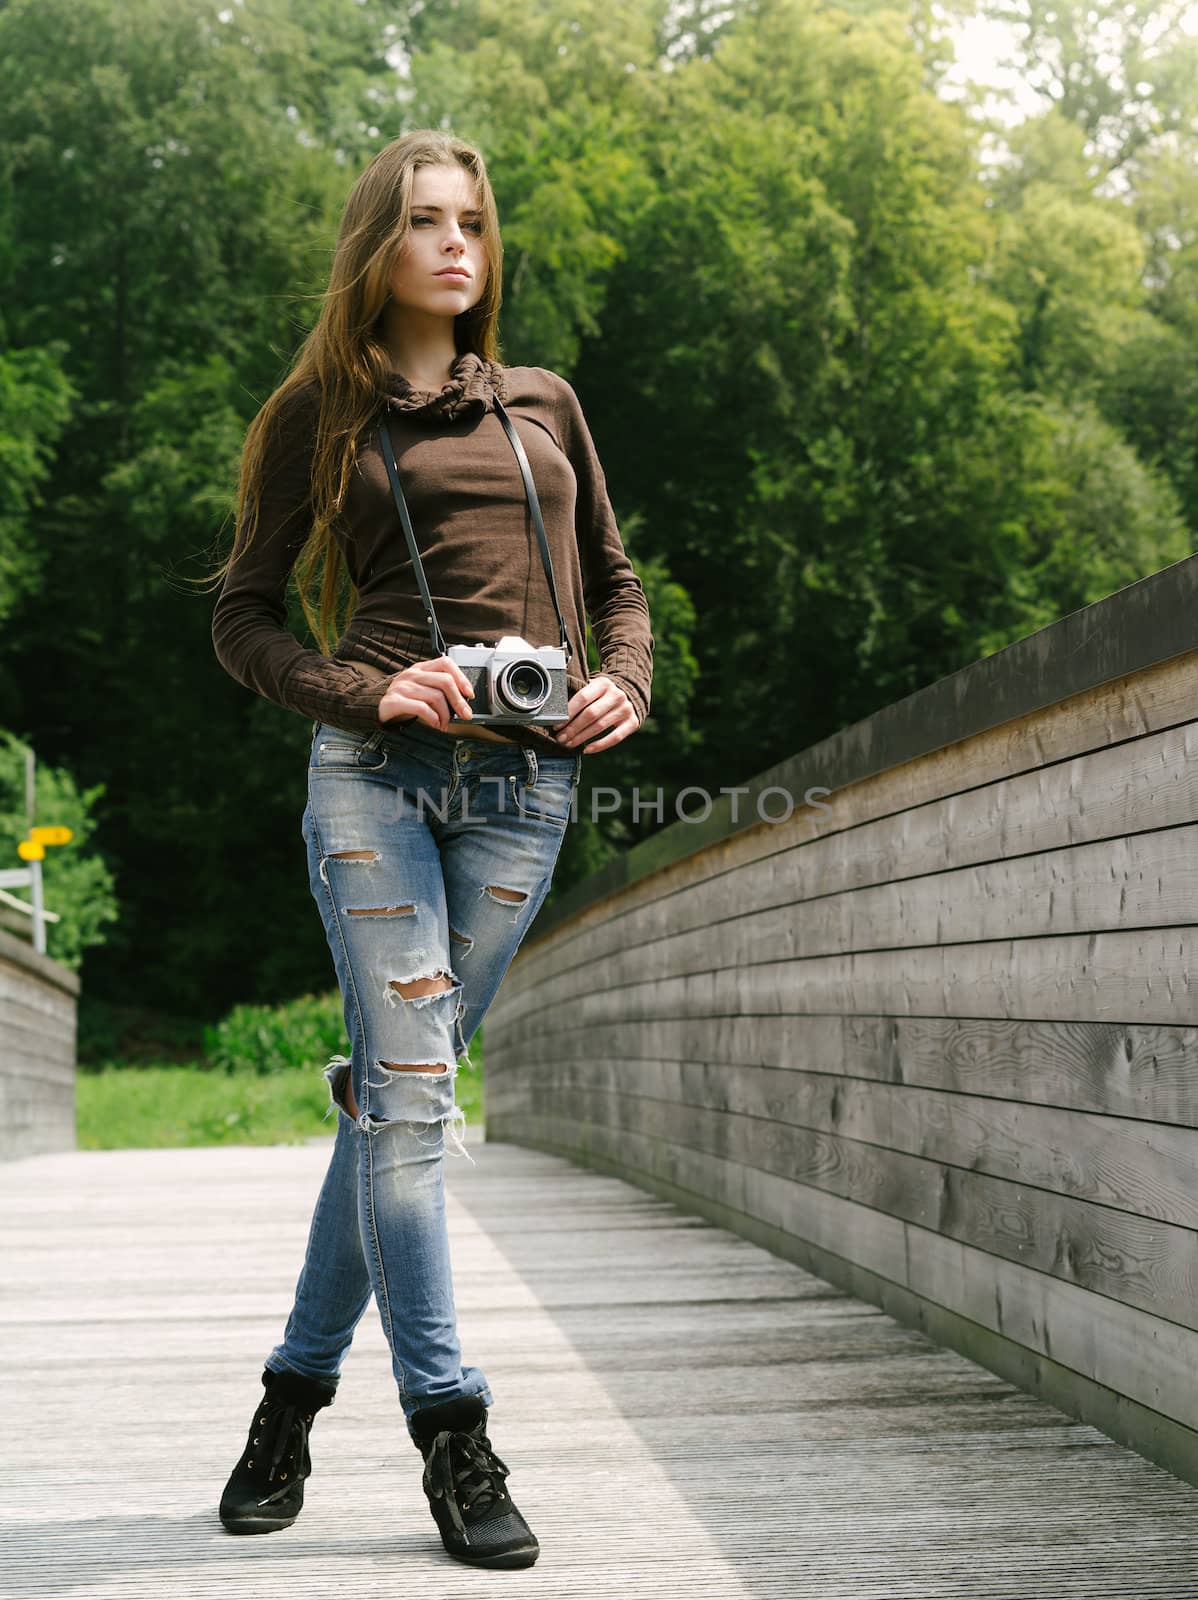 Photo of a young sexy woman with a vintage camera standing on a bridge.
